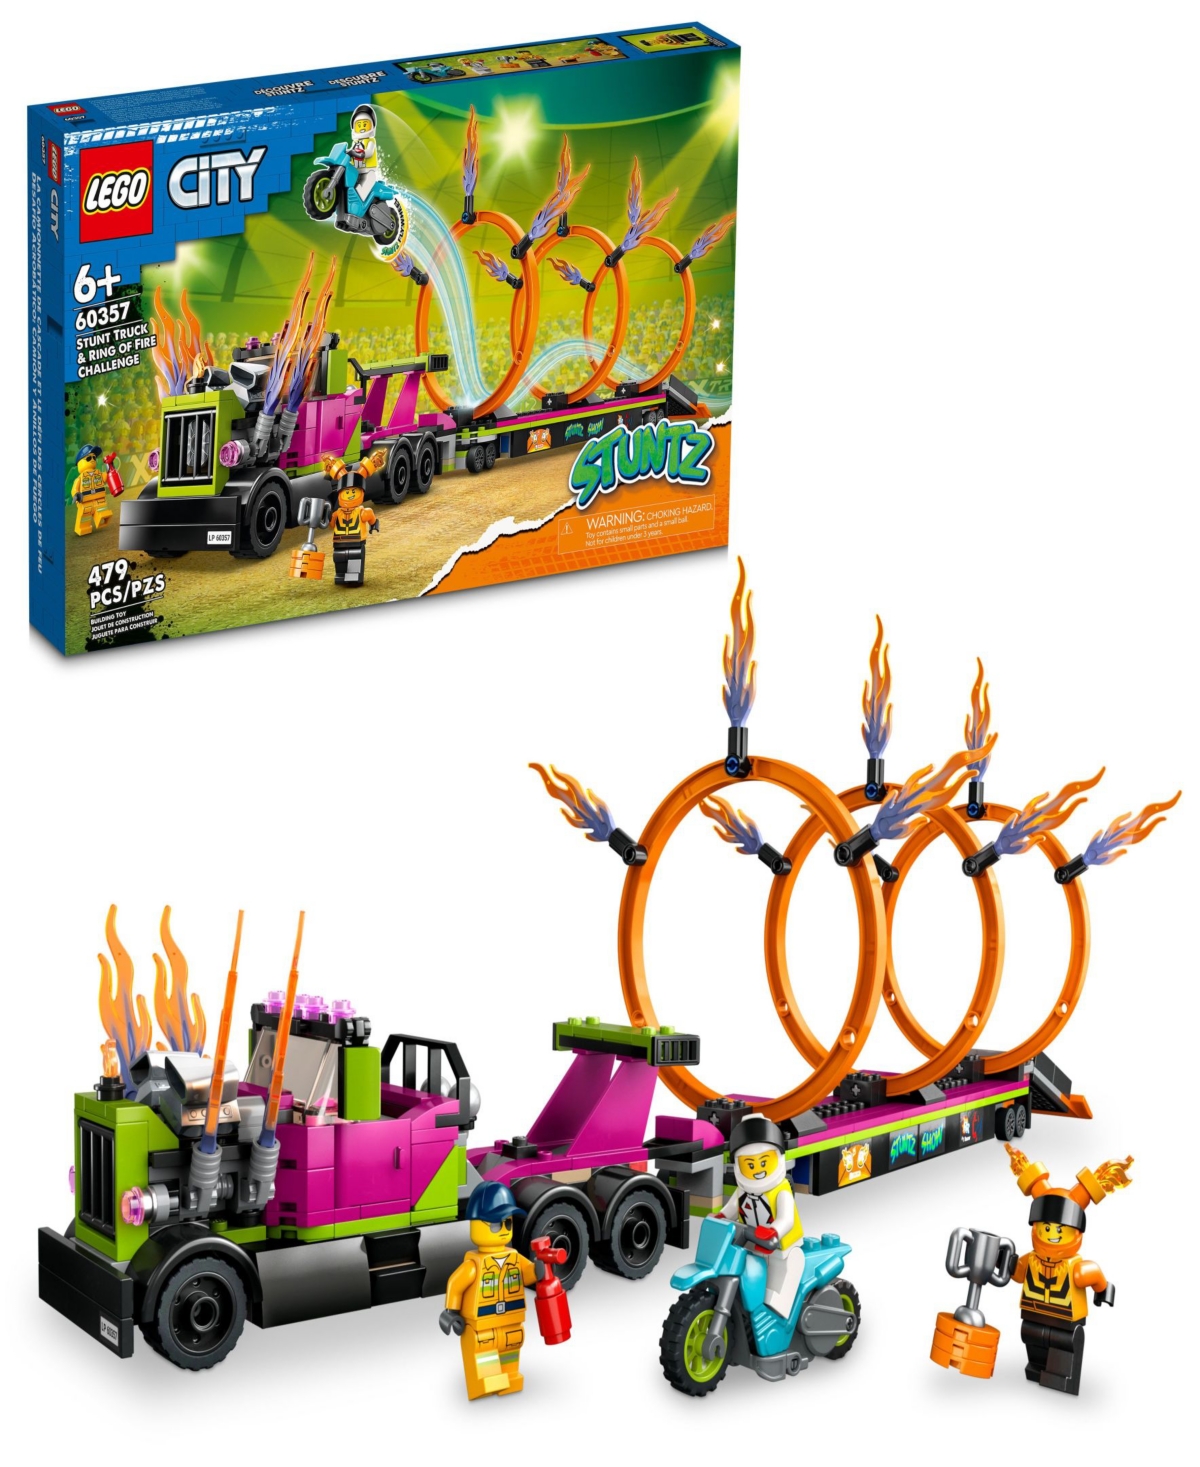 Lego City Stunt Truck Ring Of Fire Challenge 60357 Building Toy Set, 479 Pieces In Multicolor